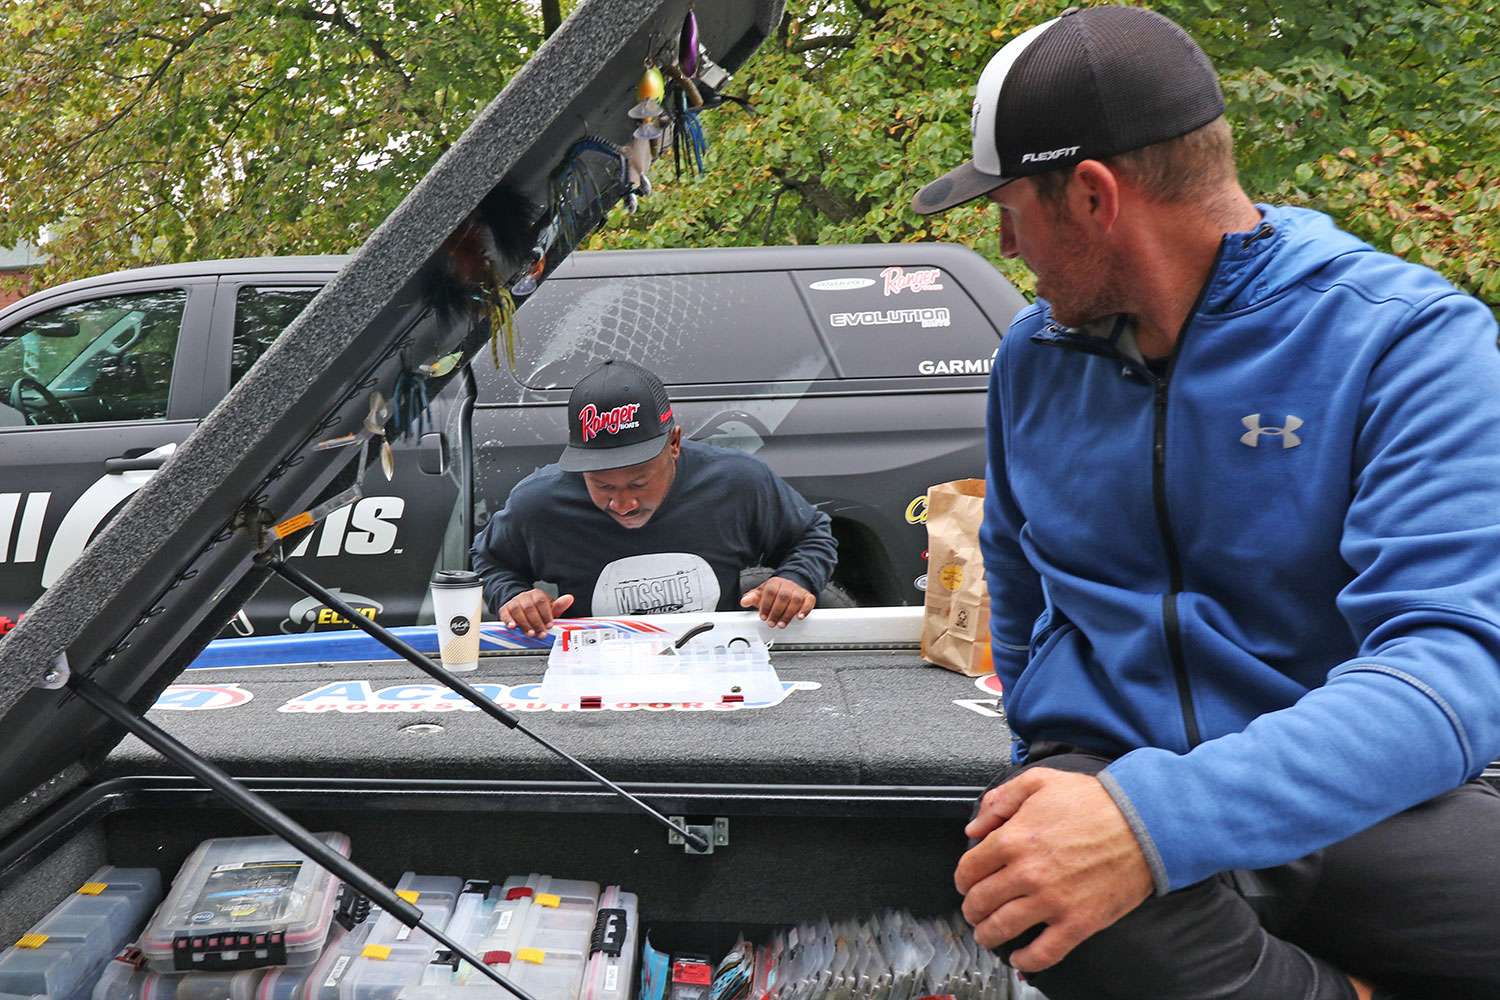 Meanwhile Alabama pro and 2017 Bassmaster Elite Series rookie Mark Daniels Jr. takes a look through Wheeler's tacklebox, and agrees it looks good.